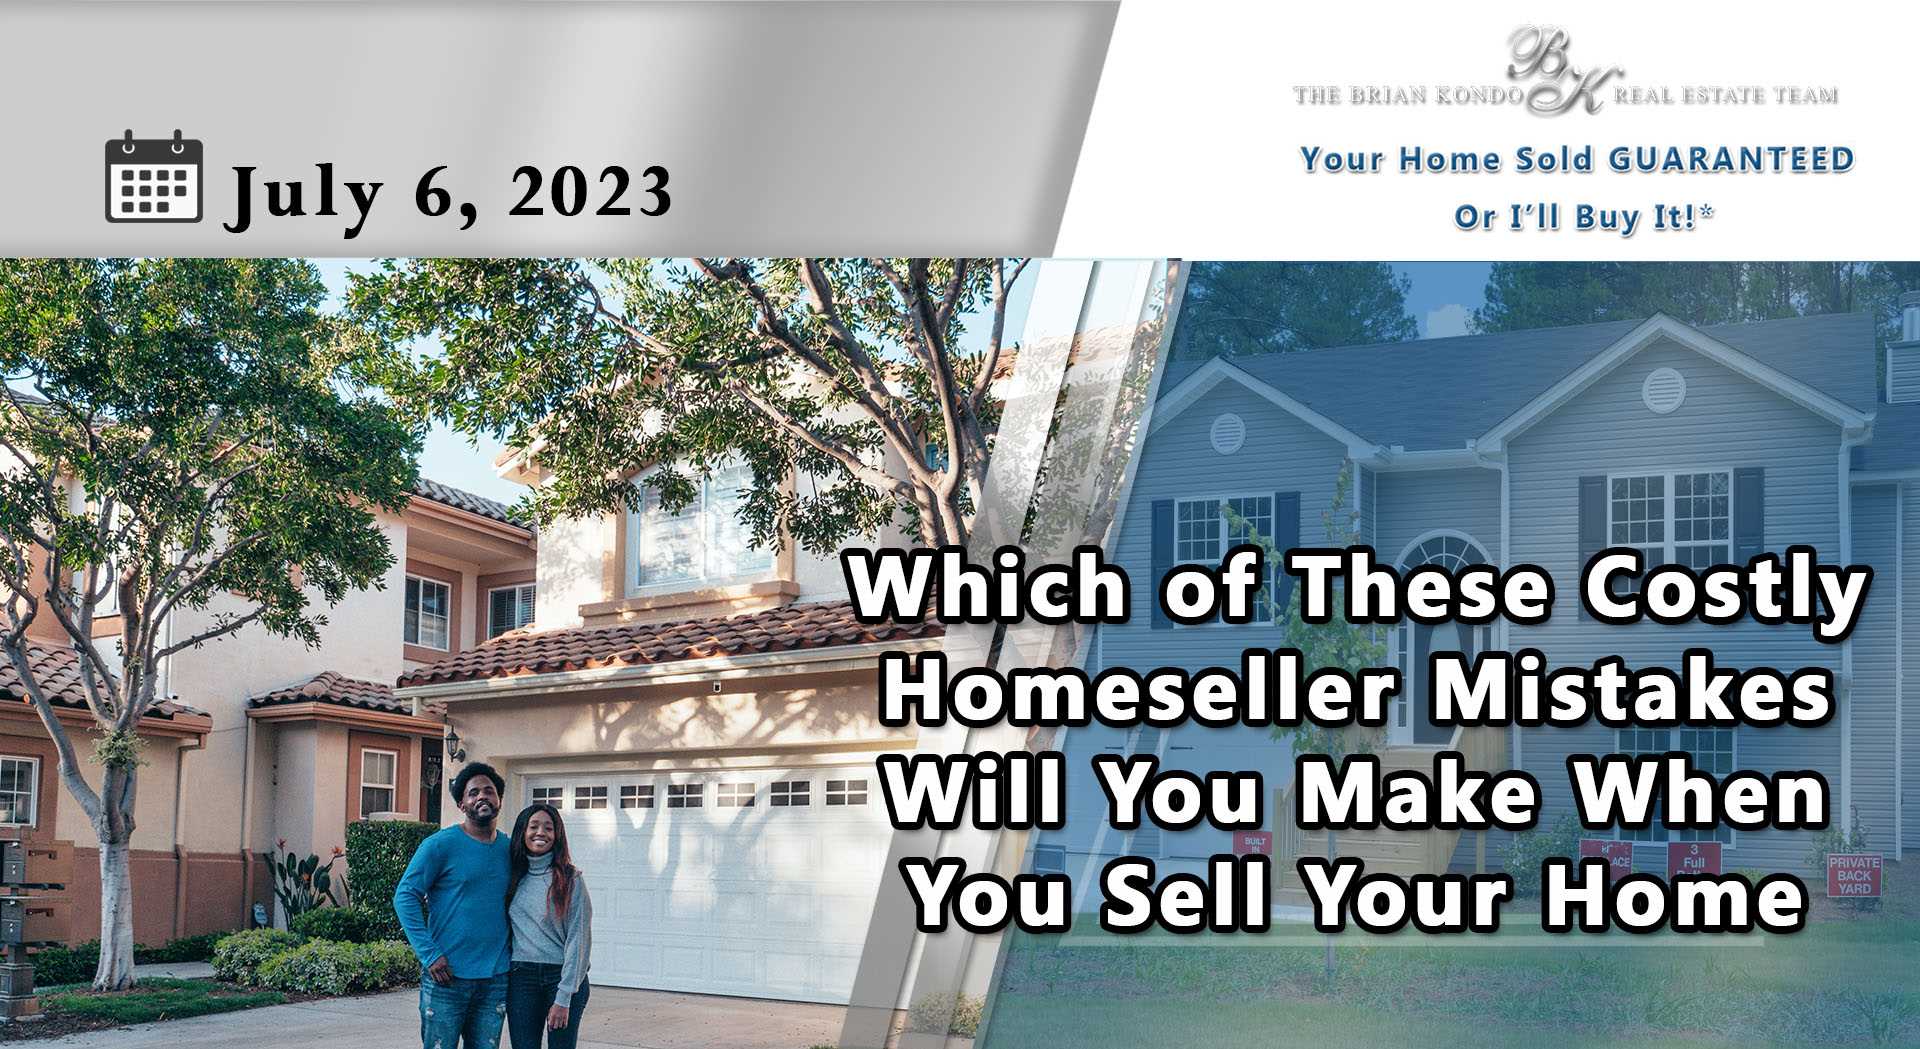 Which of These Costly Homeseller Mistakes Will You Make When You Sell Your Home?